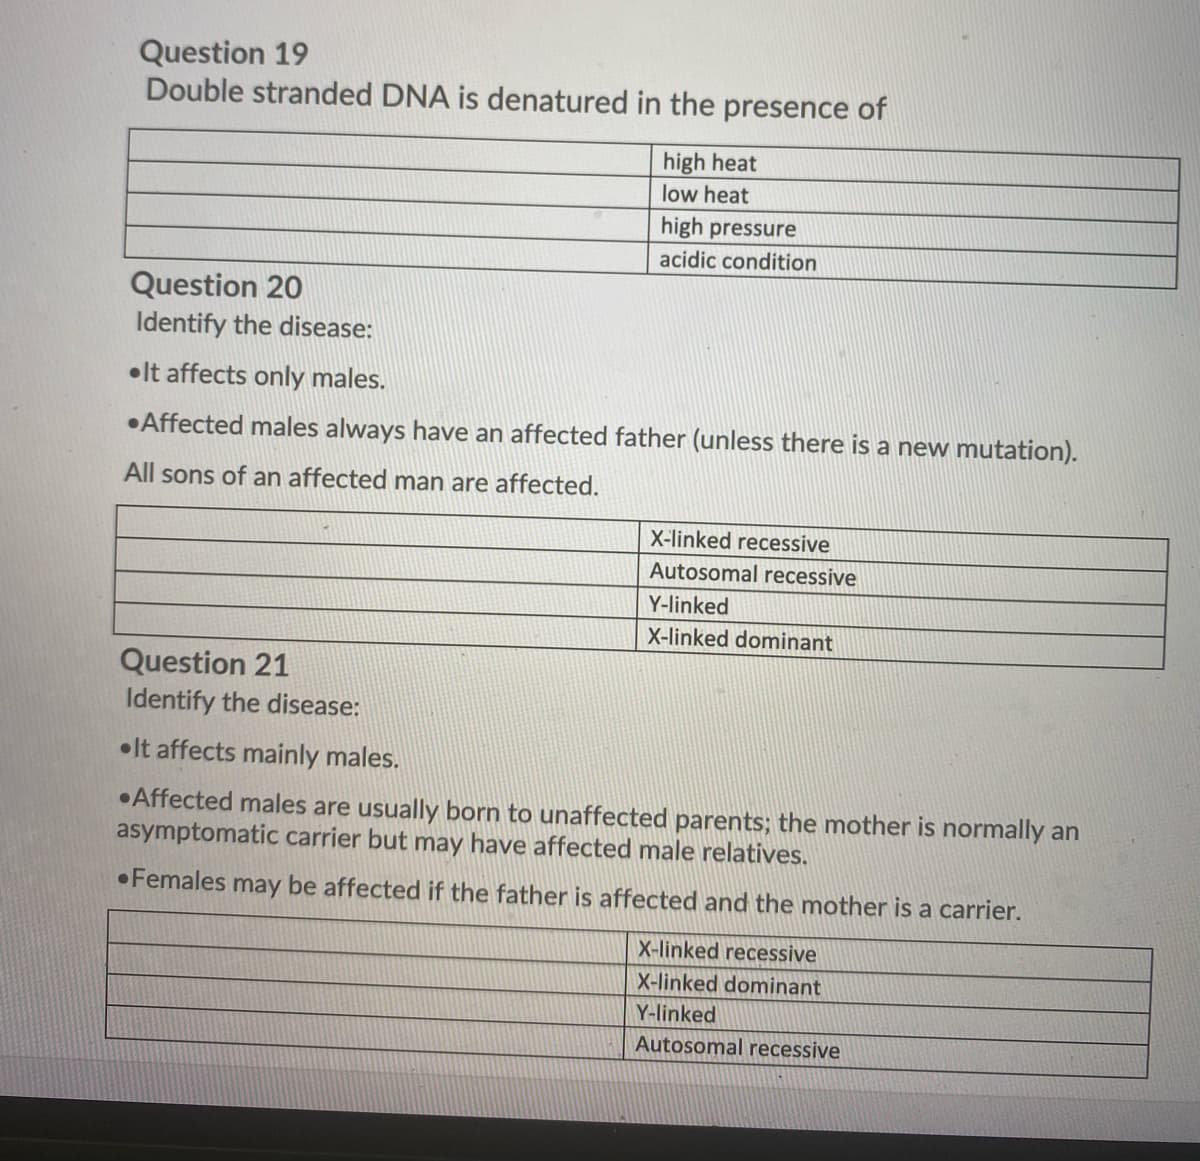 Question 19
Double stranded DNA is denatured in the presence of
high heat
low heat
high pressure
acidic condition
Question 20
Identify the disease:
•lt affects only males.
•Affected males always have an affected father (unless there is a new mutation).
All sons of an affected man are affected.
X-linked recessive
Autosomal recessive
Y-linked
X-linked dominant
Question 21
Identify the disease:
•It affects mainly males.
•Affected males are usually born to unaffected parents; the mother is normally an
asymptomatic carrier but may have affected male relatives.
•Females may be affected if the father is affected and the mother is a carrier.
X-linked recessive
X-linked dominant
Y-linked
Autosomal recessive
